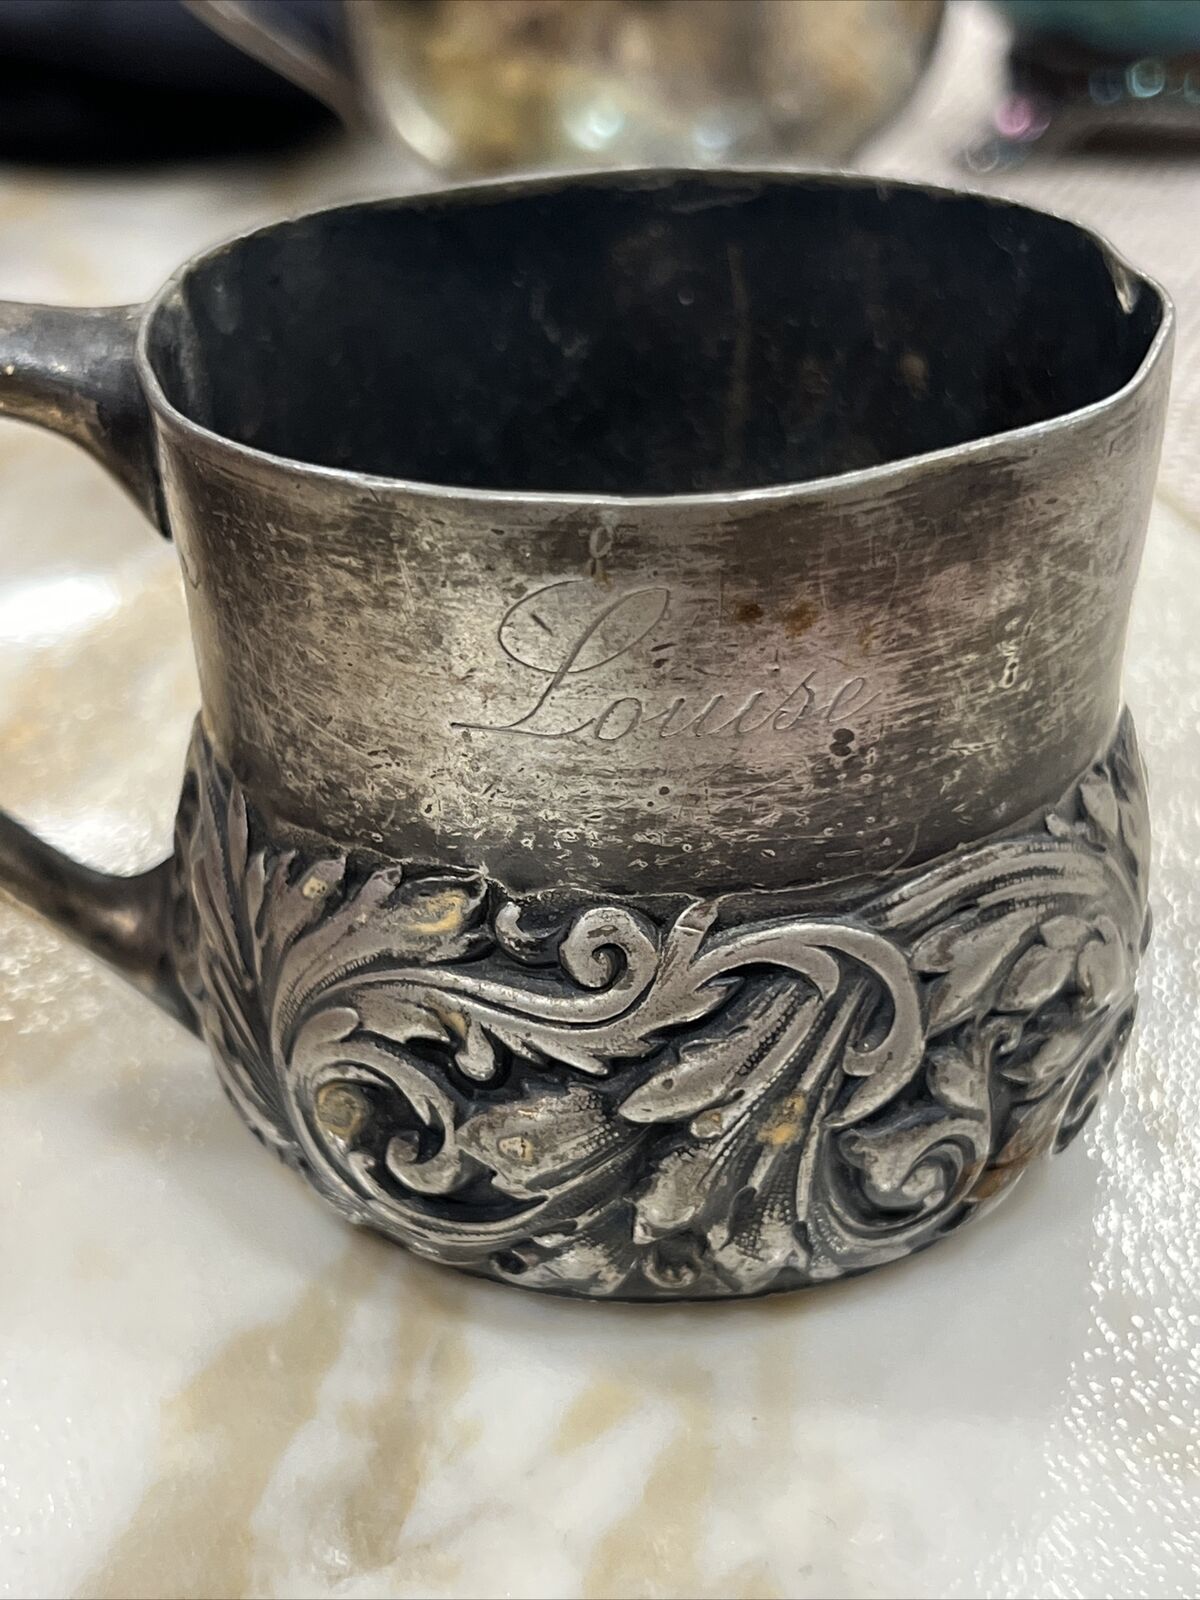 BEAUTIFUL Meriden B Company Silverplated Childs Cup Engraved Louise